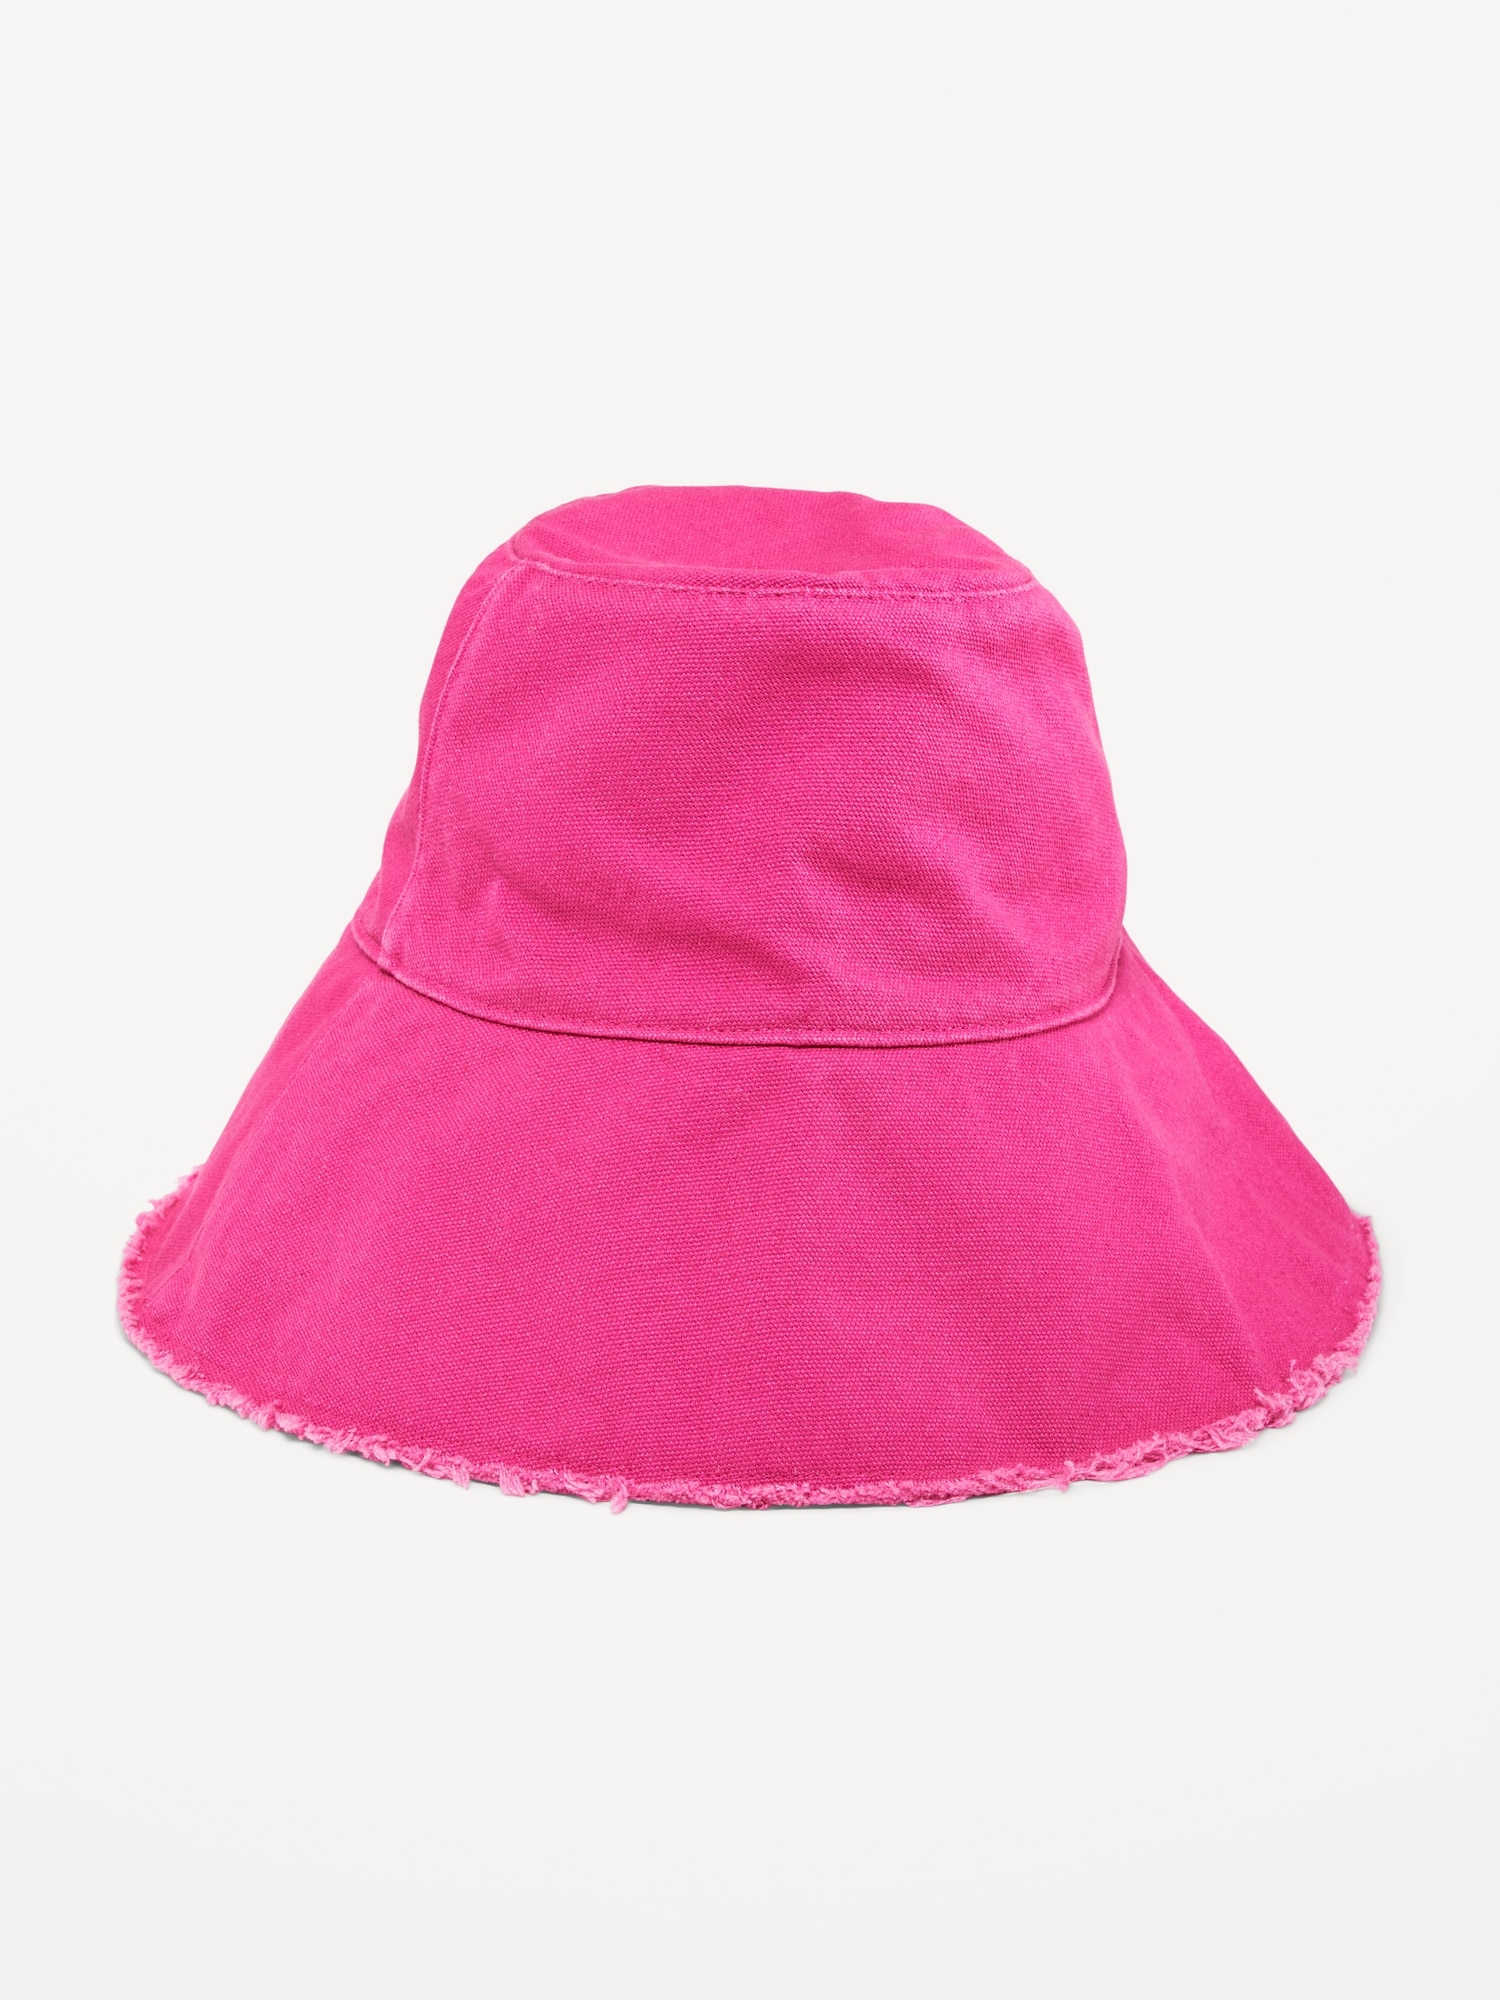 Adult Hot Pink Classic Bucket Hat With Navy Under Brim and Circle